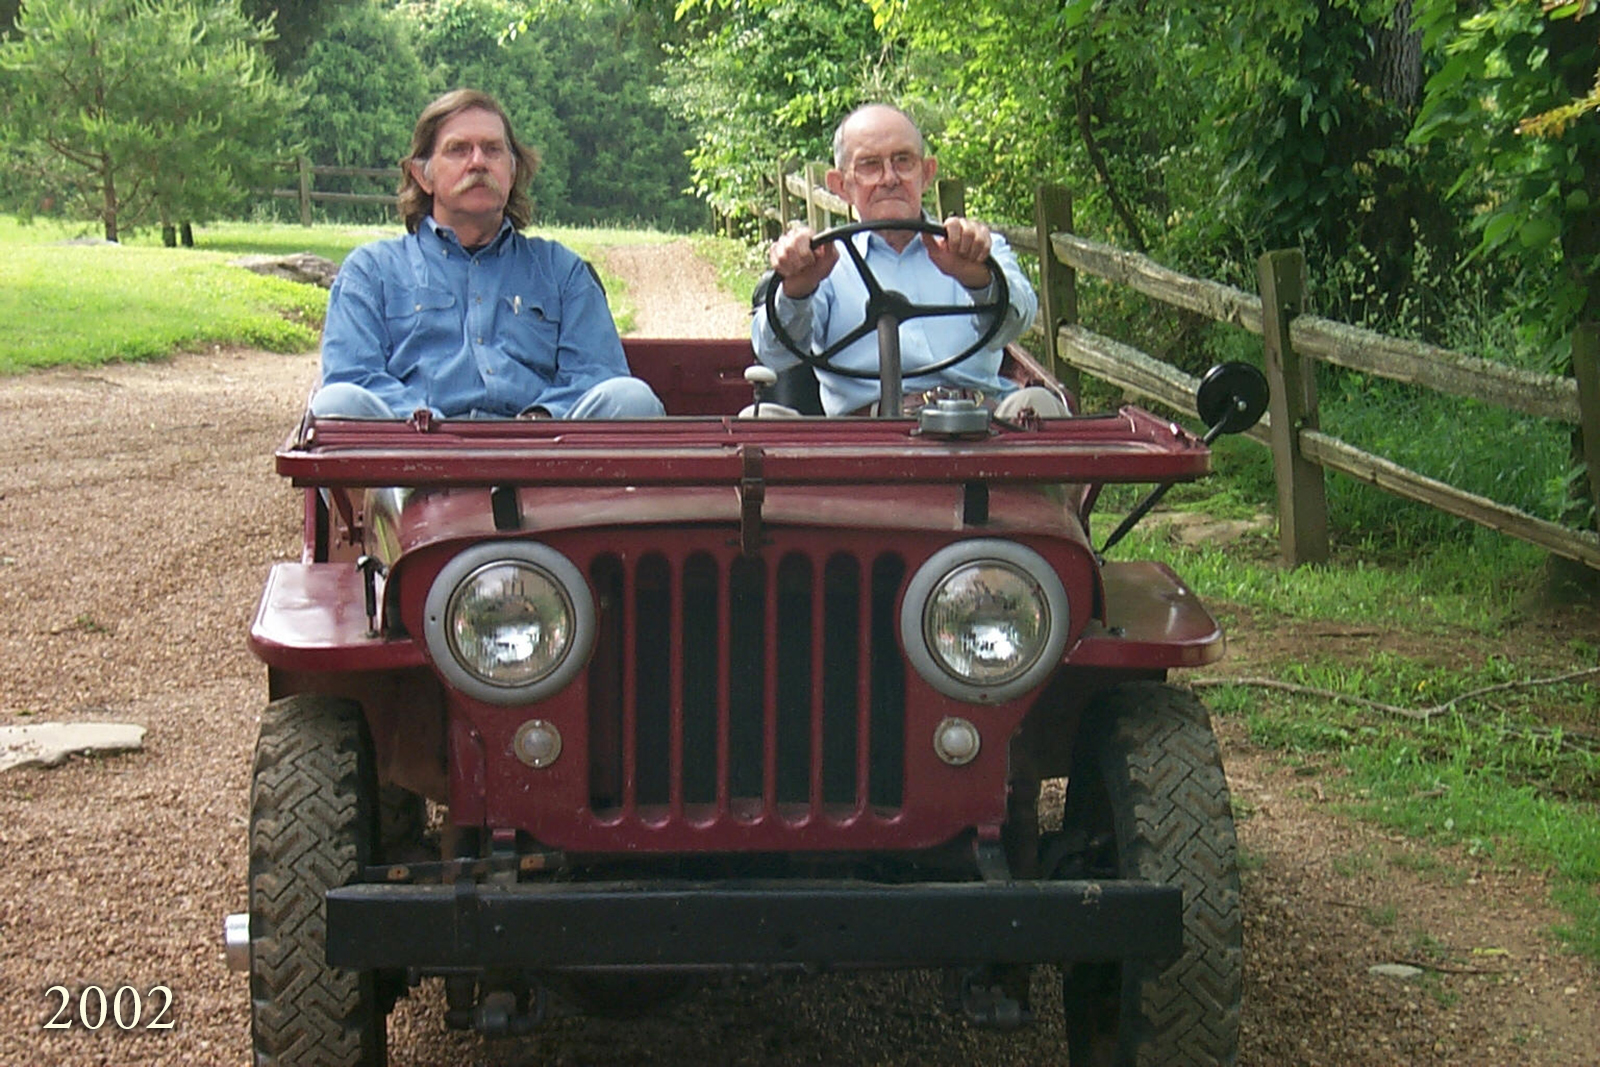 Colonel riding in an old jeep with his dad in 2002